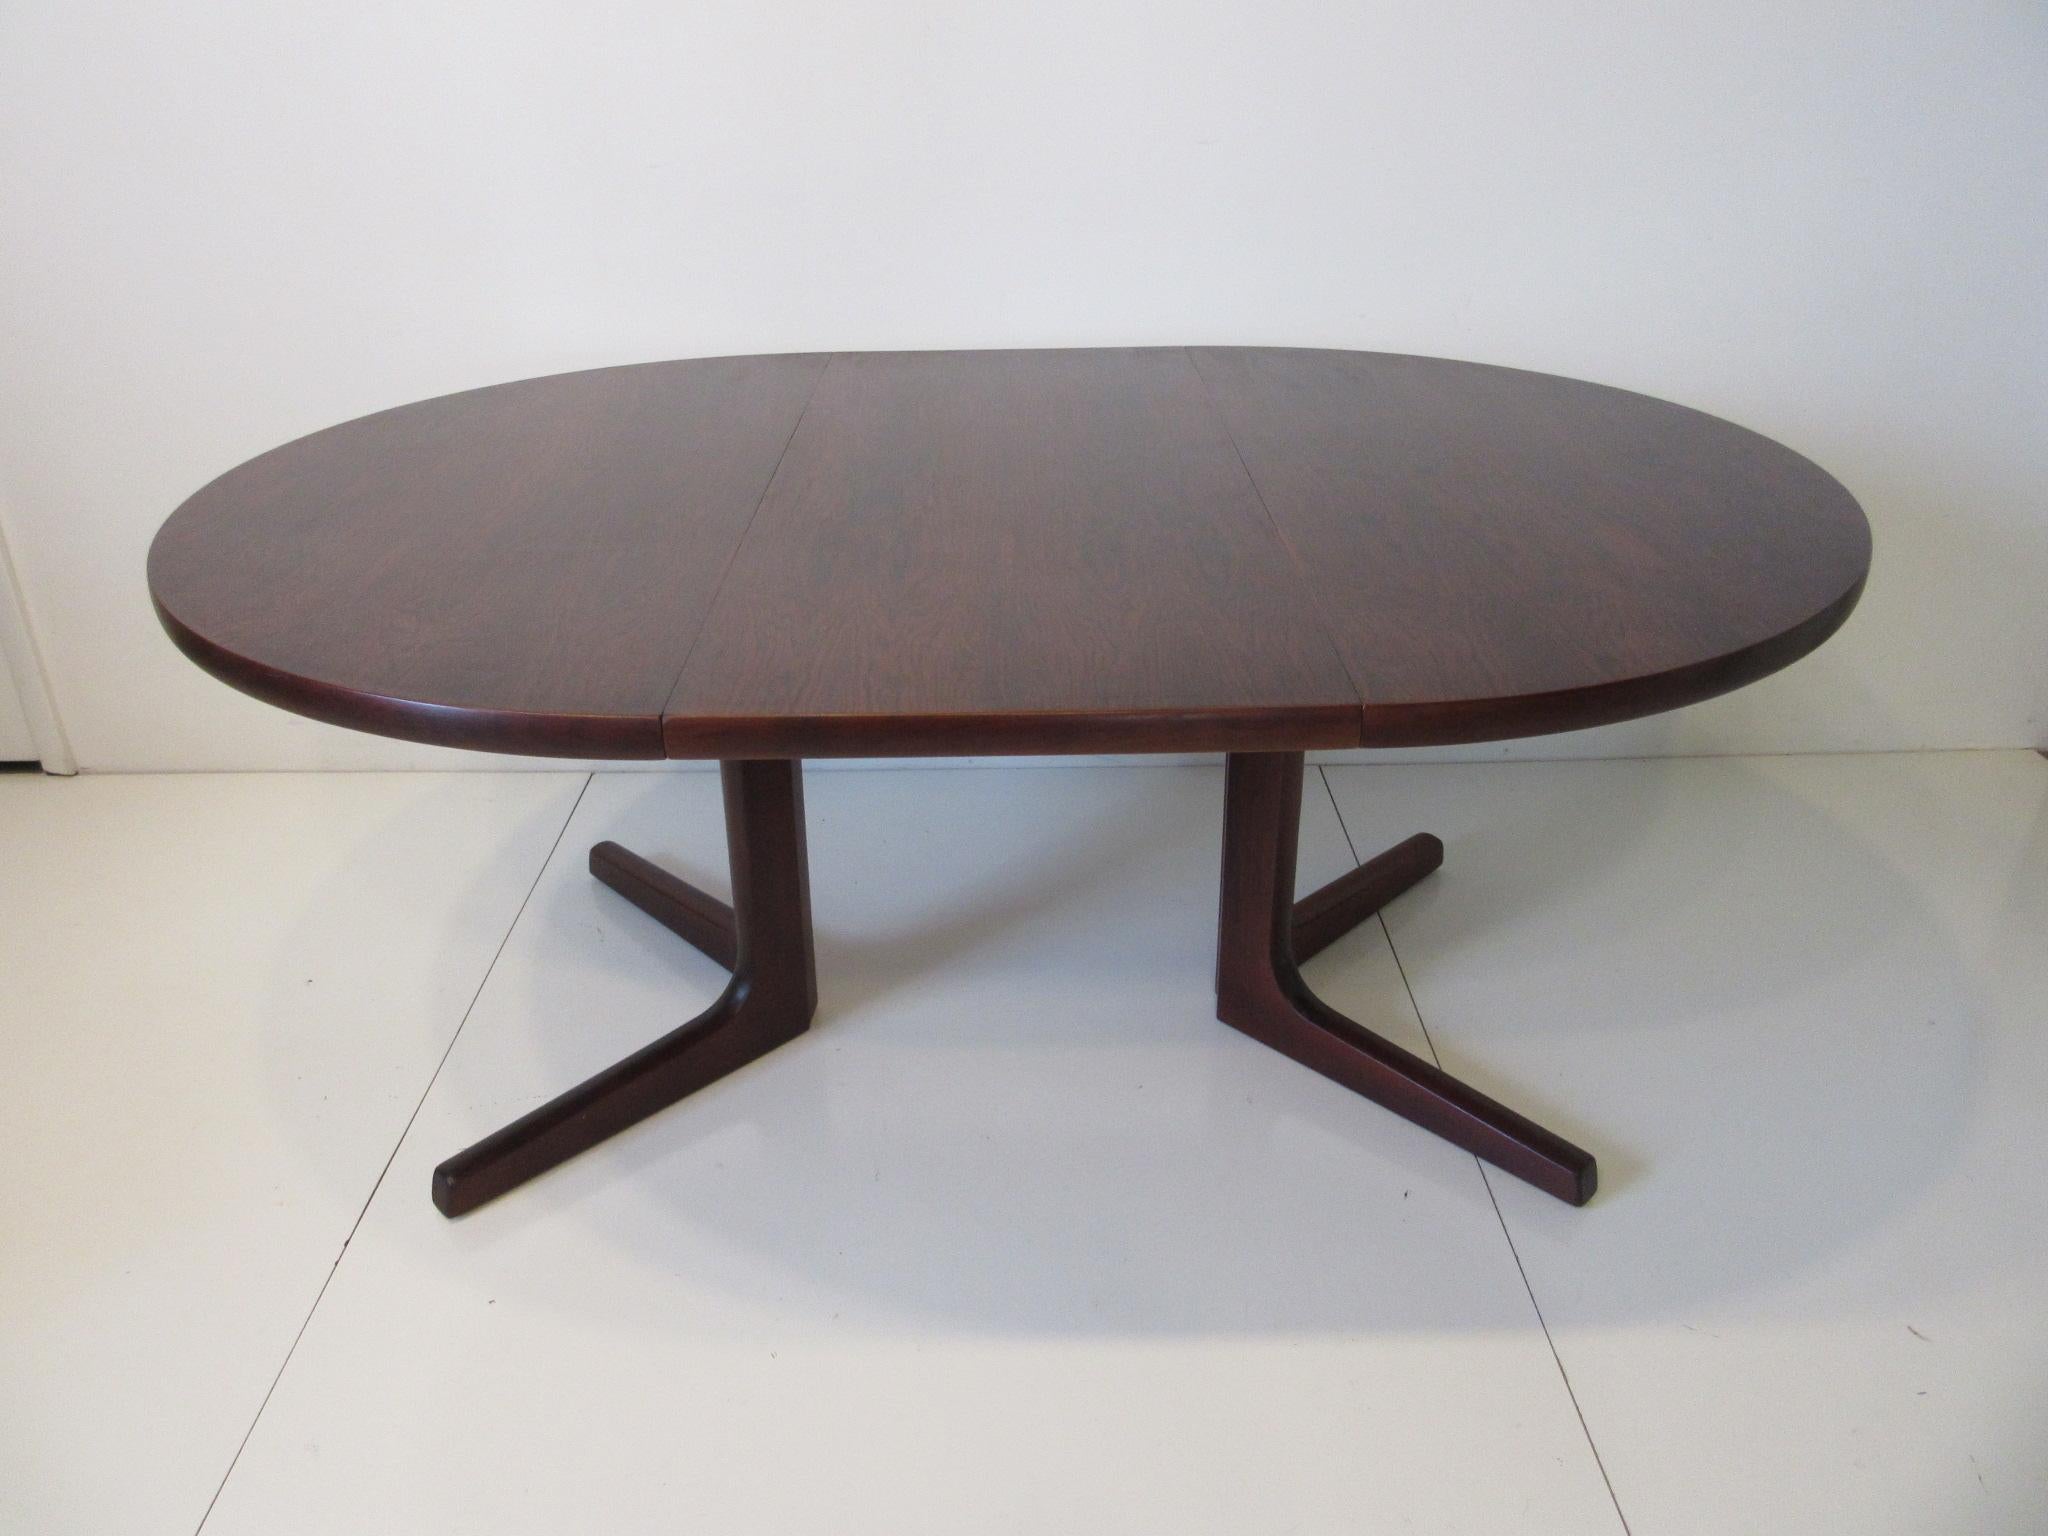 A deep rich and well grained Brazilian rosewood extendable Danish dining table with two 19.5